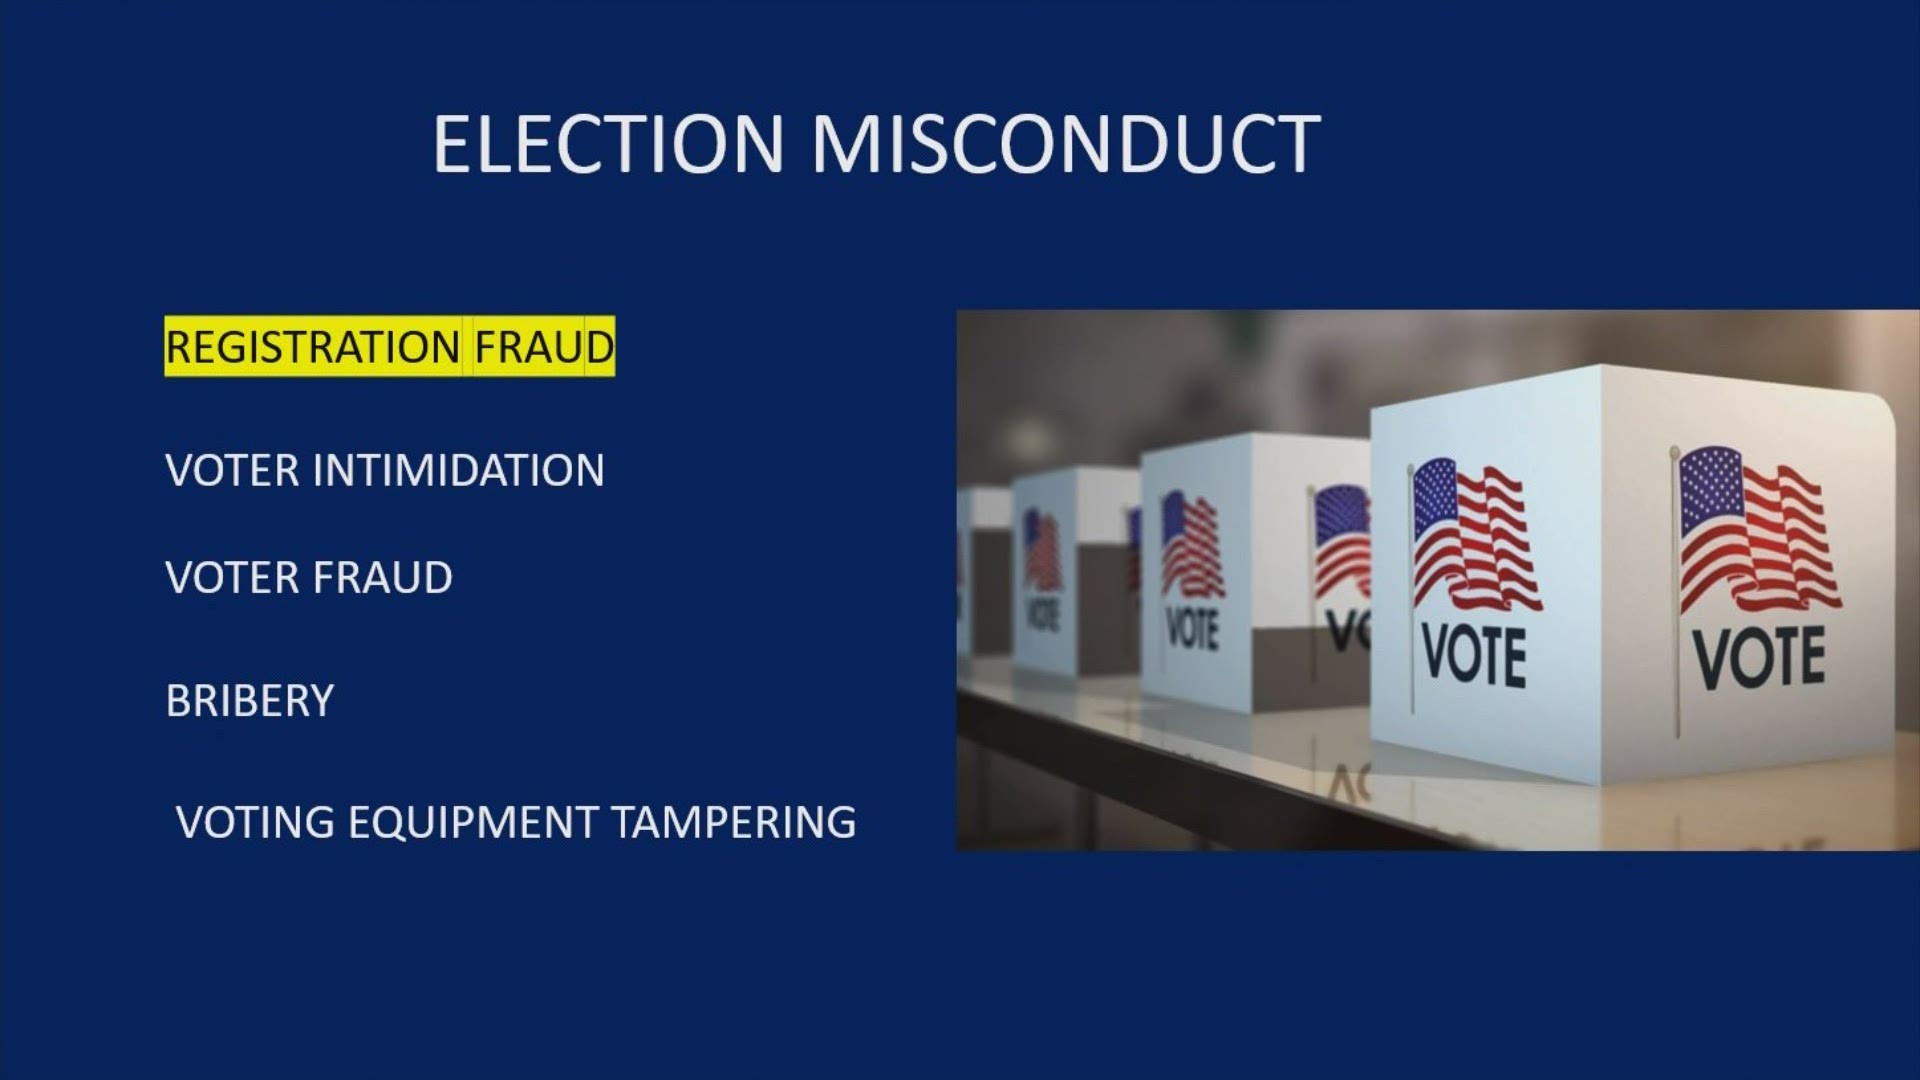 With 'voter fraud' on everyone's minds, here's how to avoid doing just that.